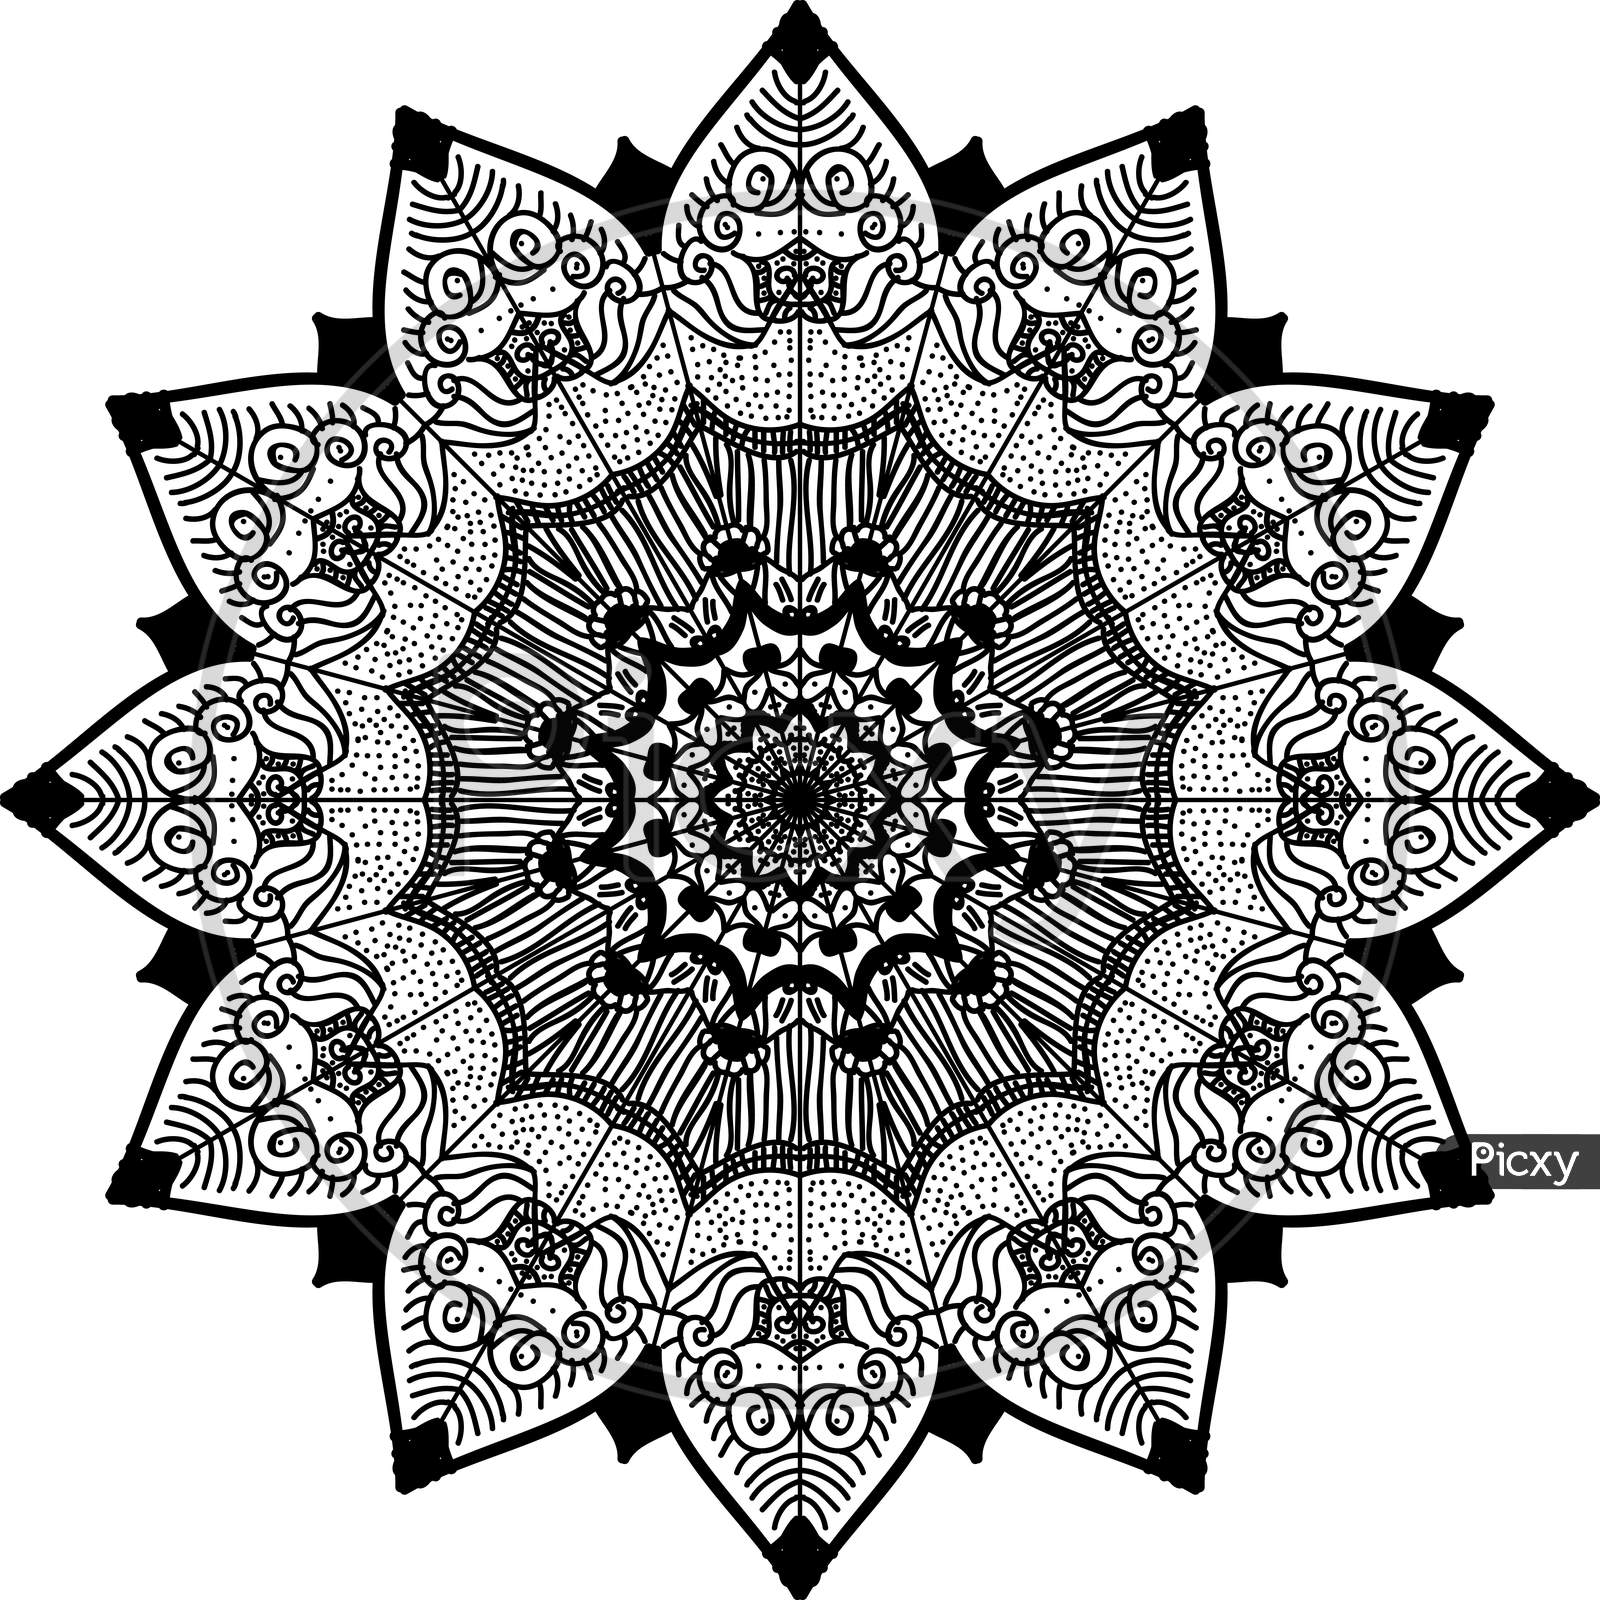 Mandalas for coloring book. Decorative round ornaments. Unusual flower shape. Oriental vector, Anti-stress therapy patterns. Weave design elements. Yoga logos